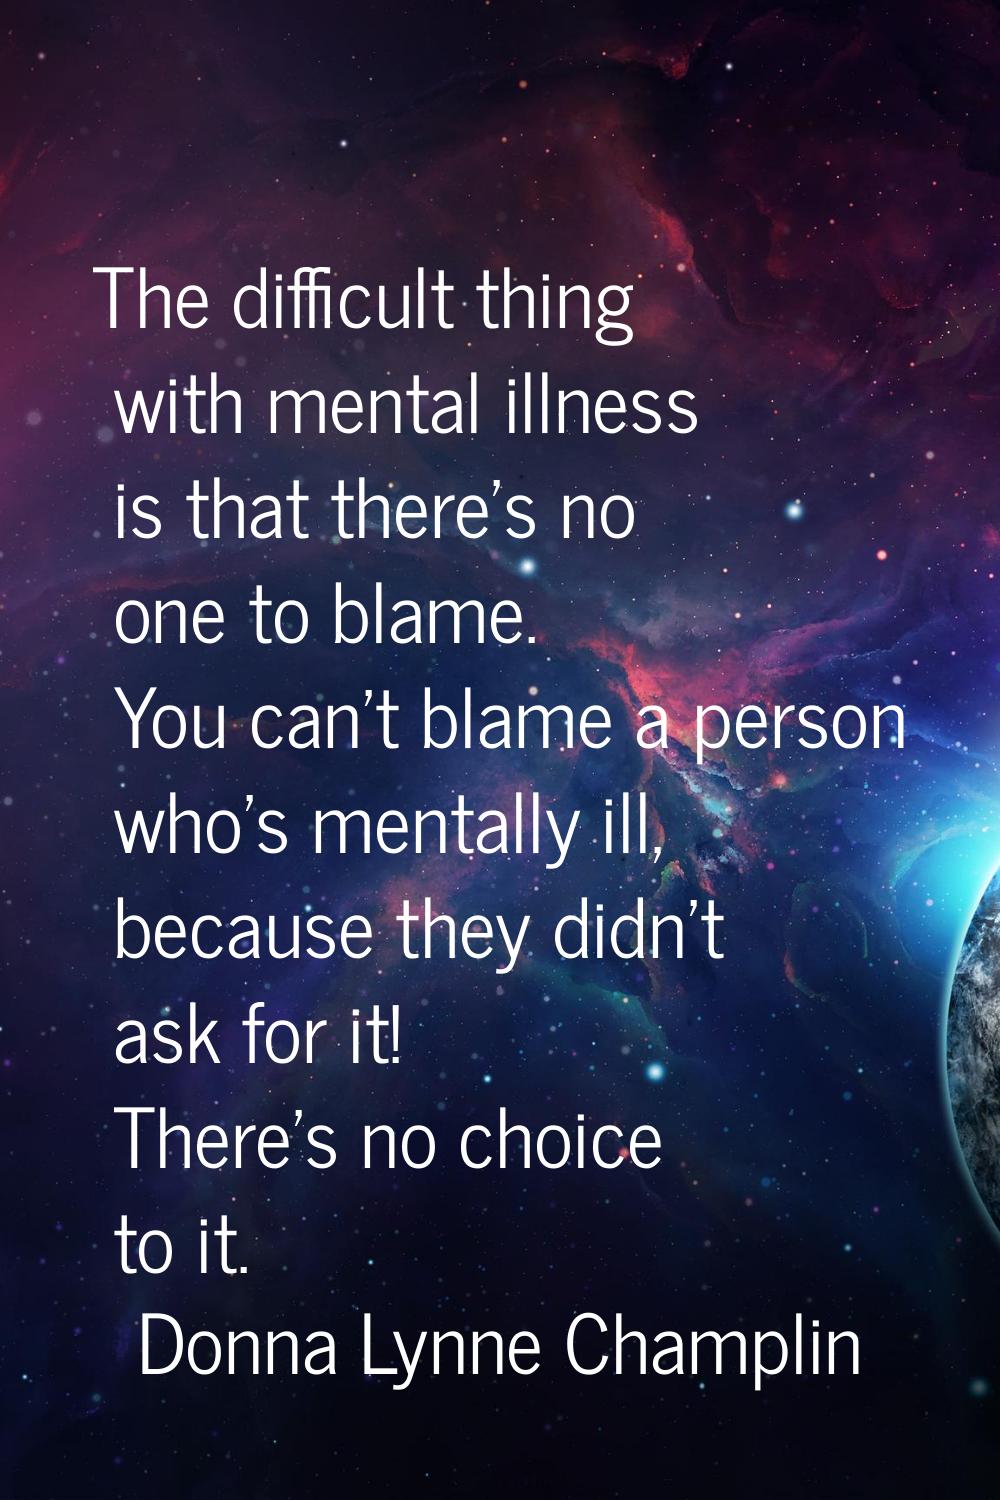 The difficult thing with mental illness is that there's no one to blame. You can't blame a person w